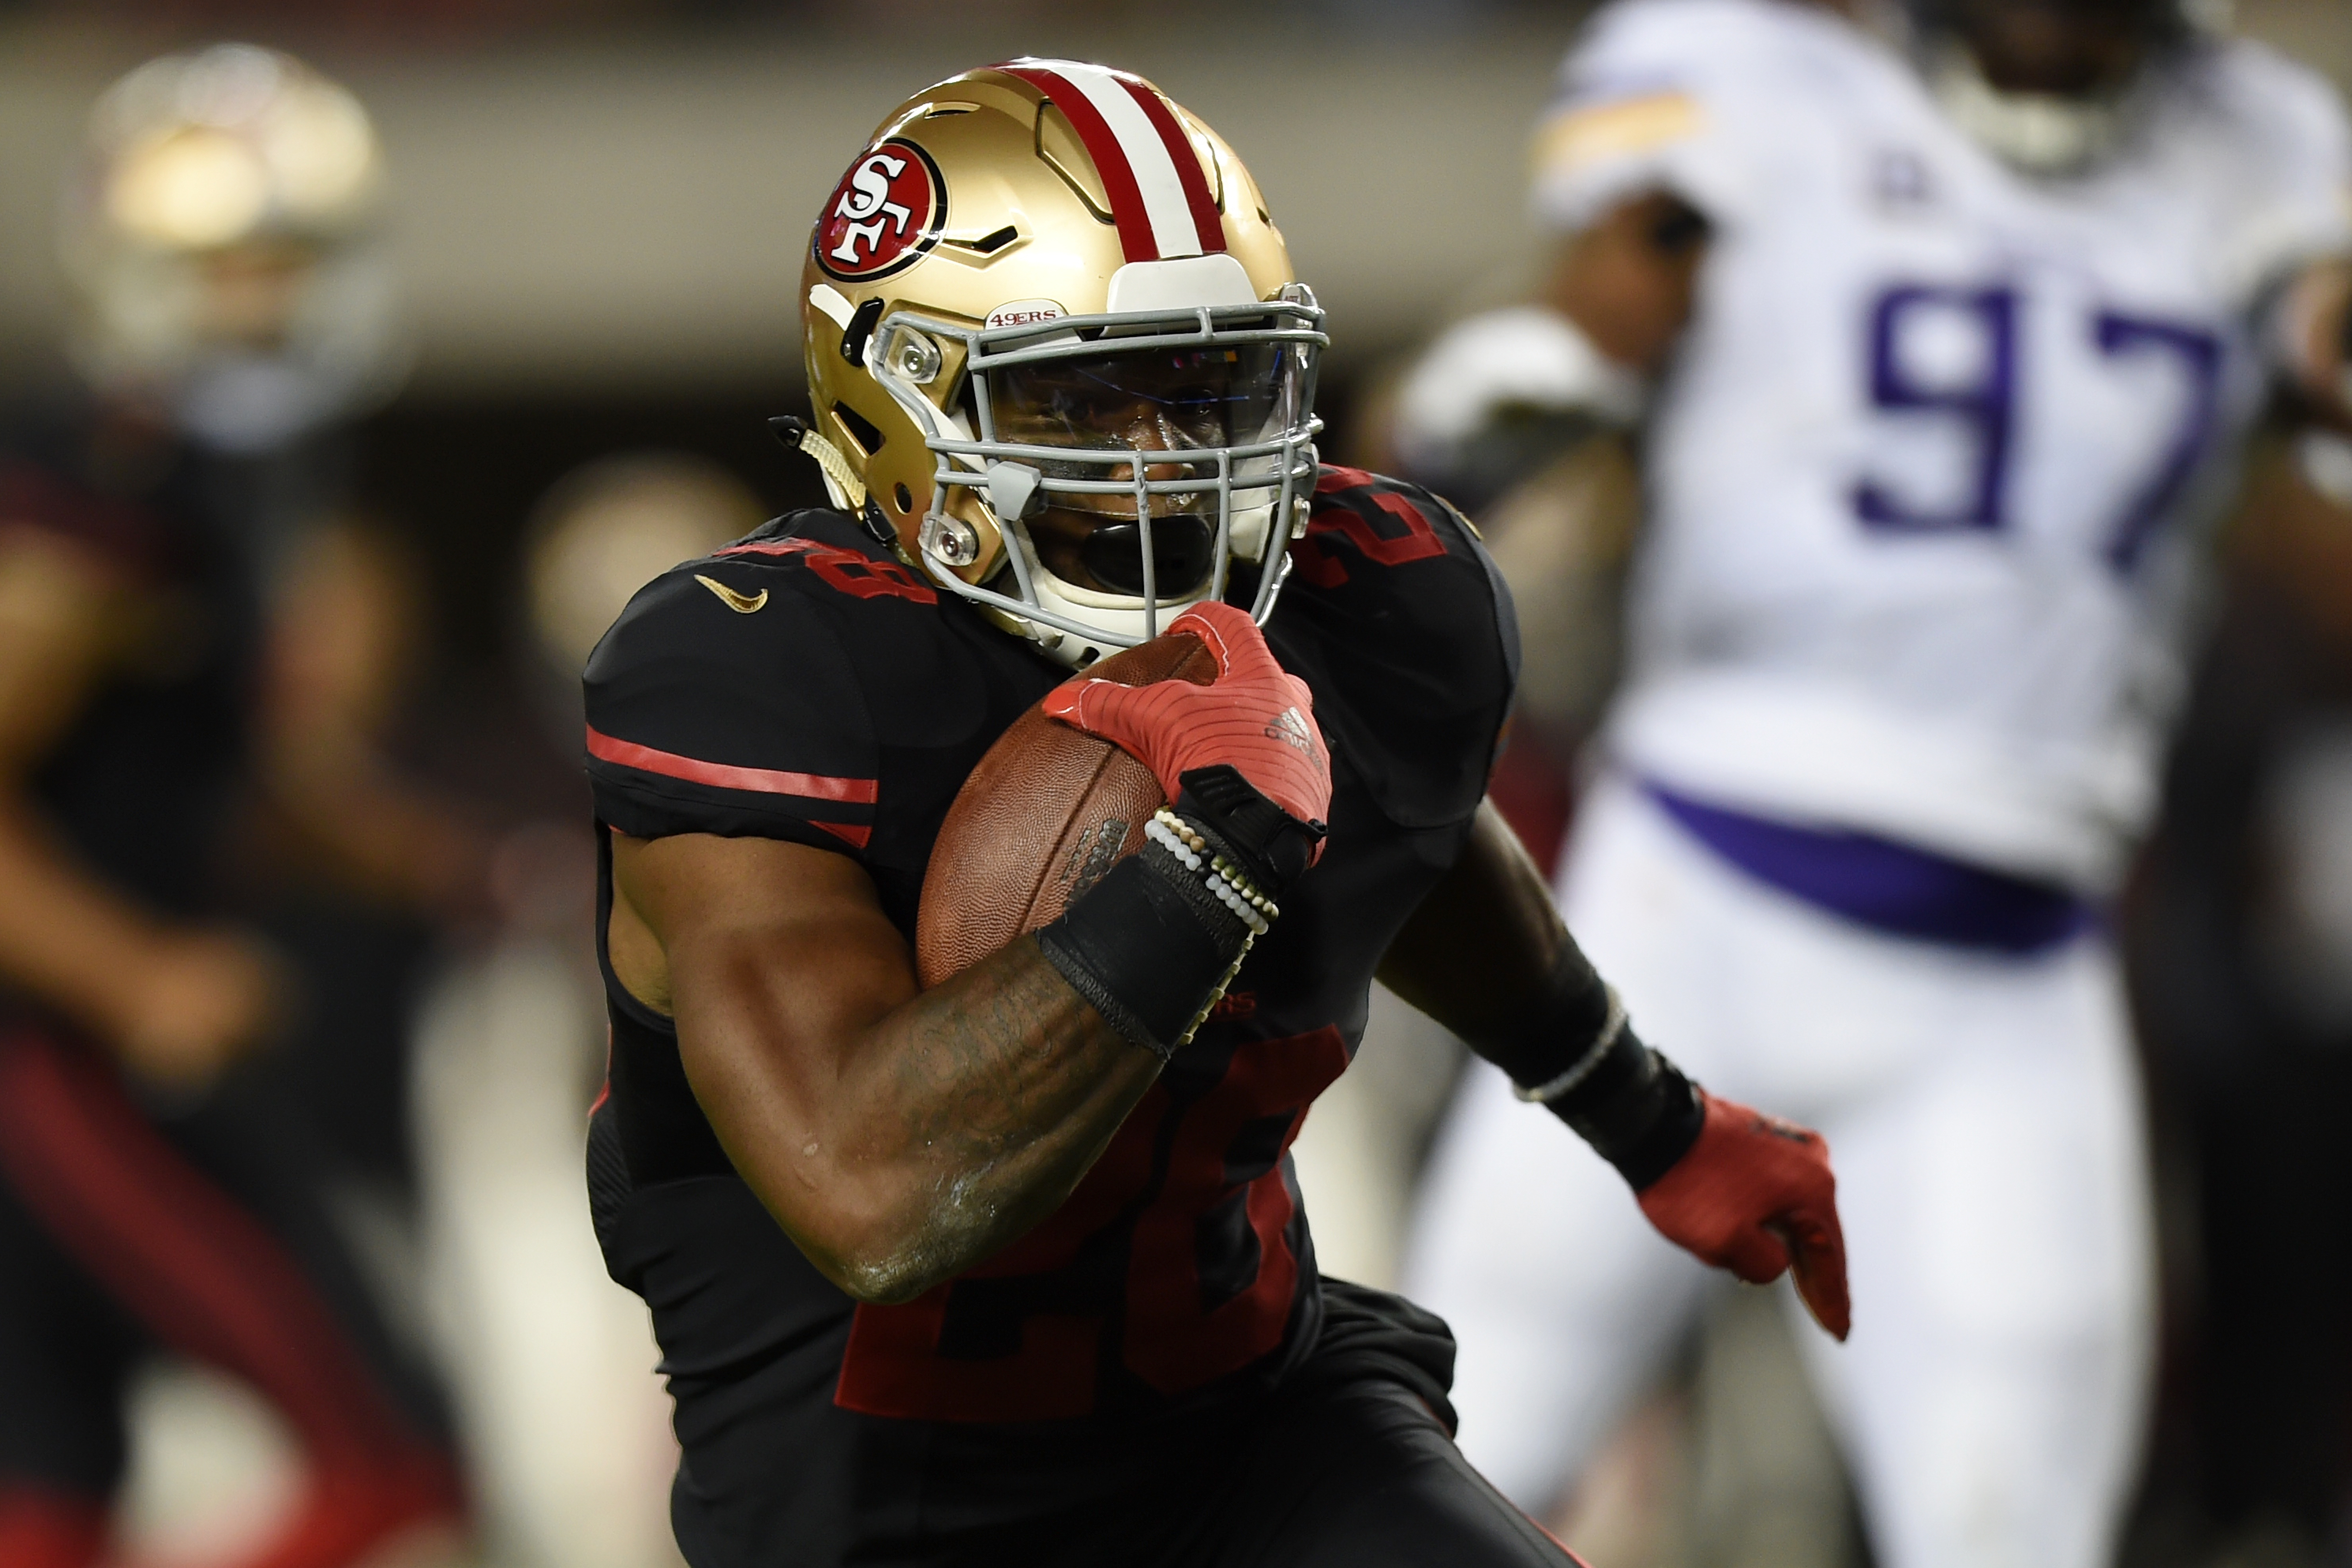 Carlos Hyde left today's game after a hit to his knee (Getty).